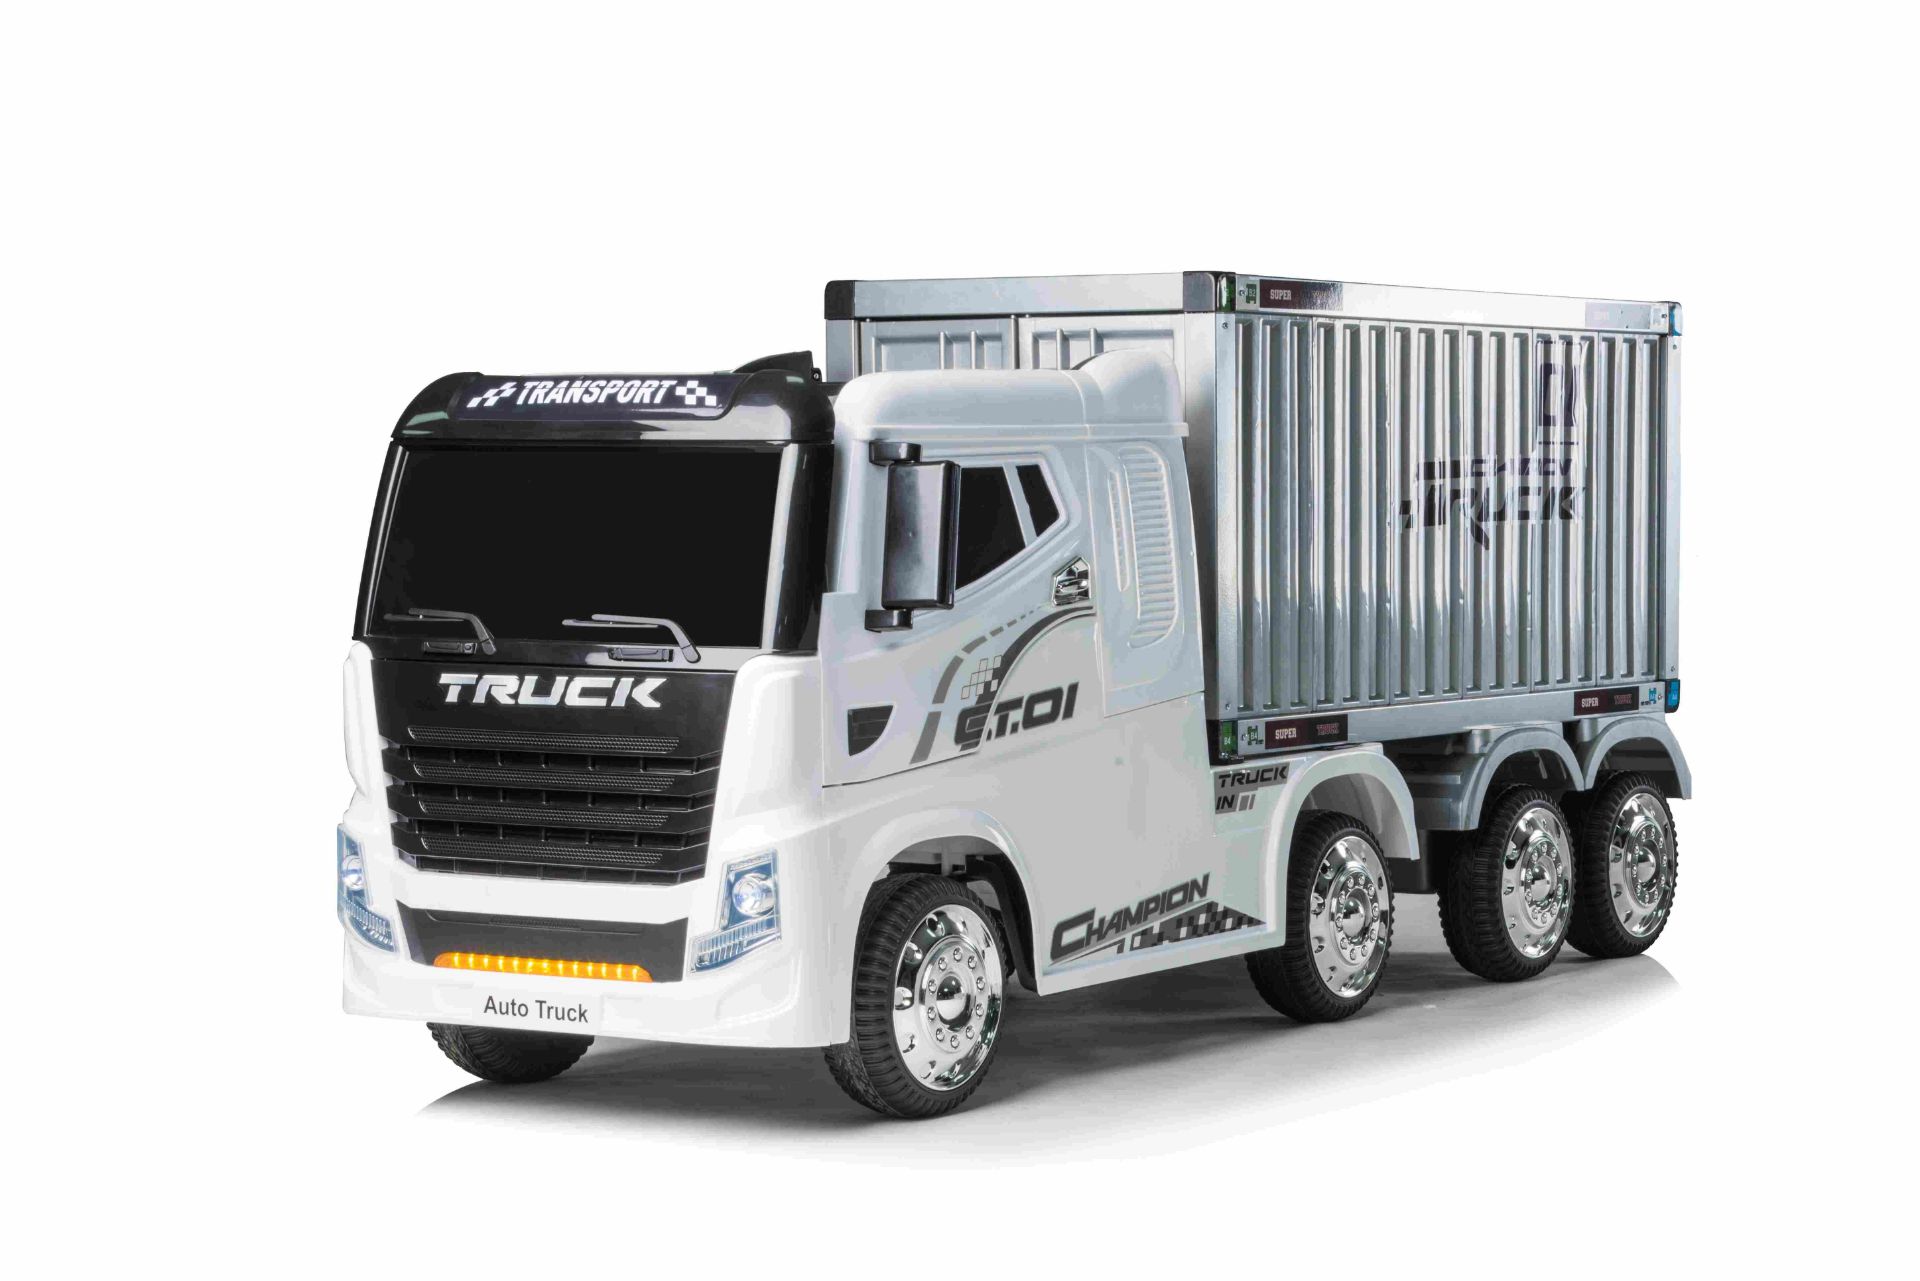 Ride On Truck with Detachable Container and Parental Remote Control 12V 4 Wheel Drive JJ2011 - White - Image 3 of 6